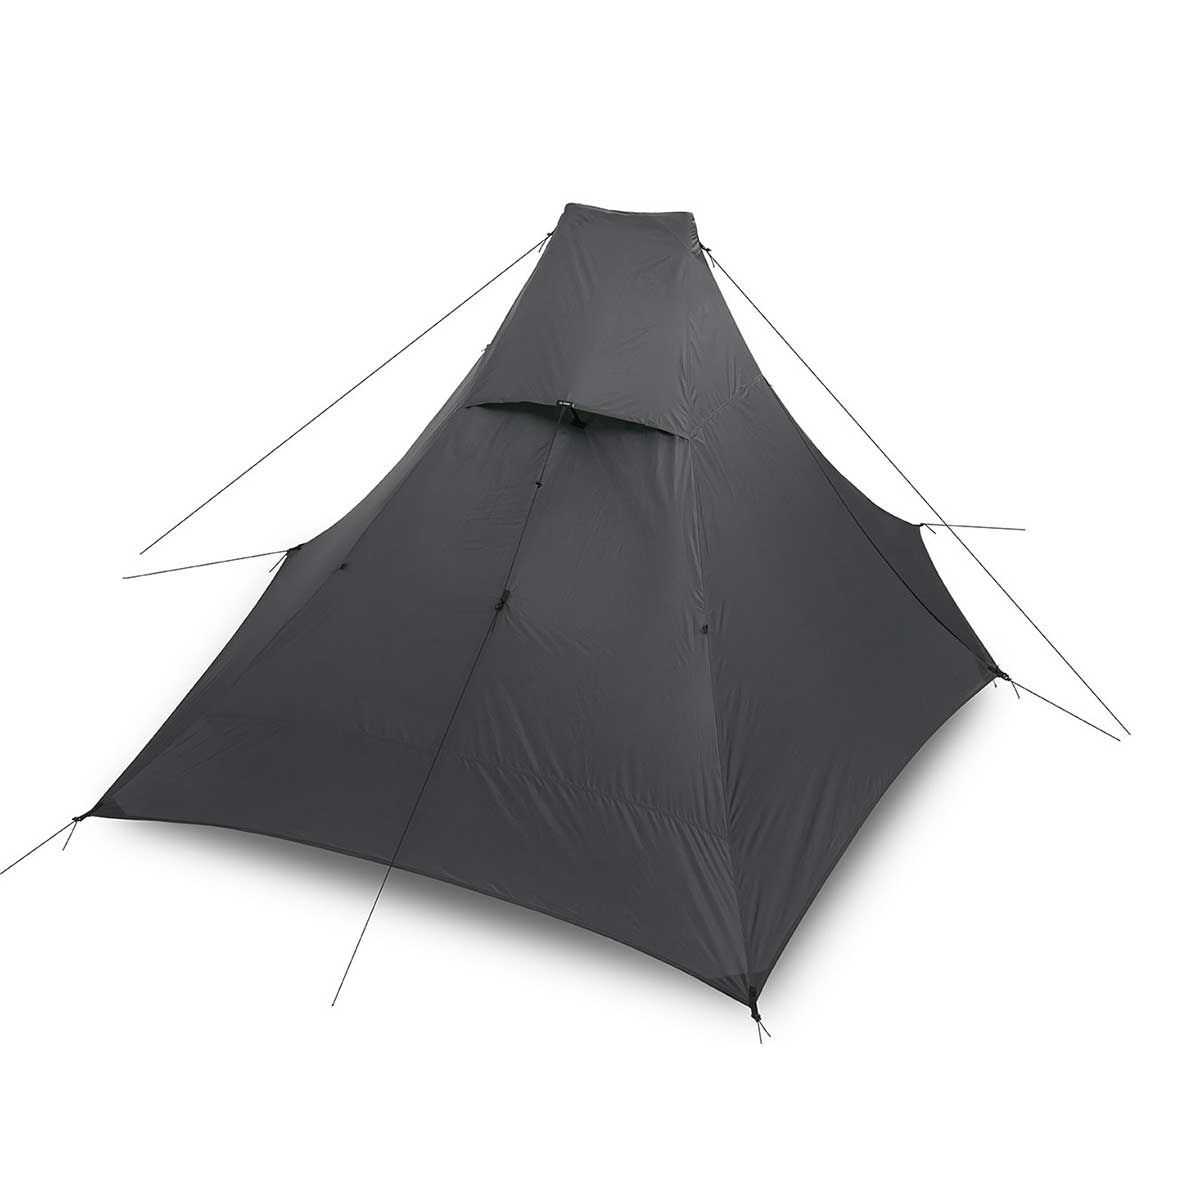 Liteway Illusion Duo backpacking tent - 2 people